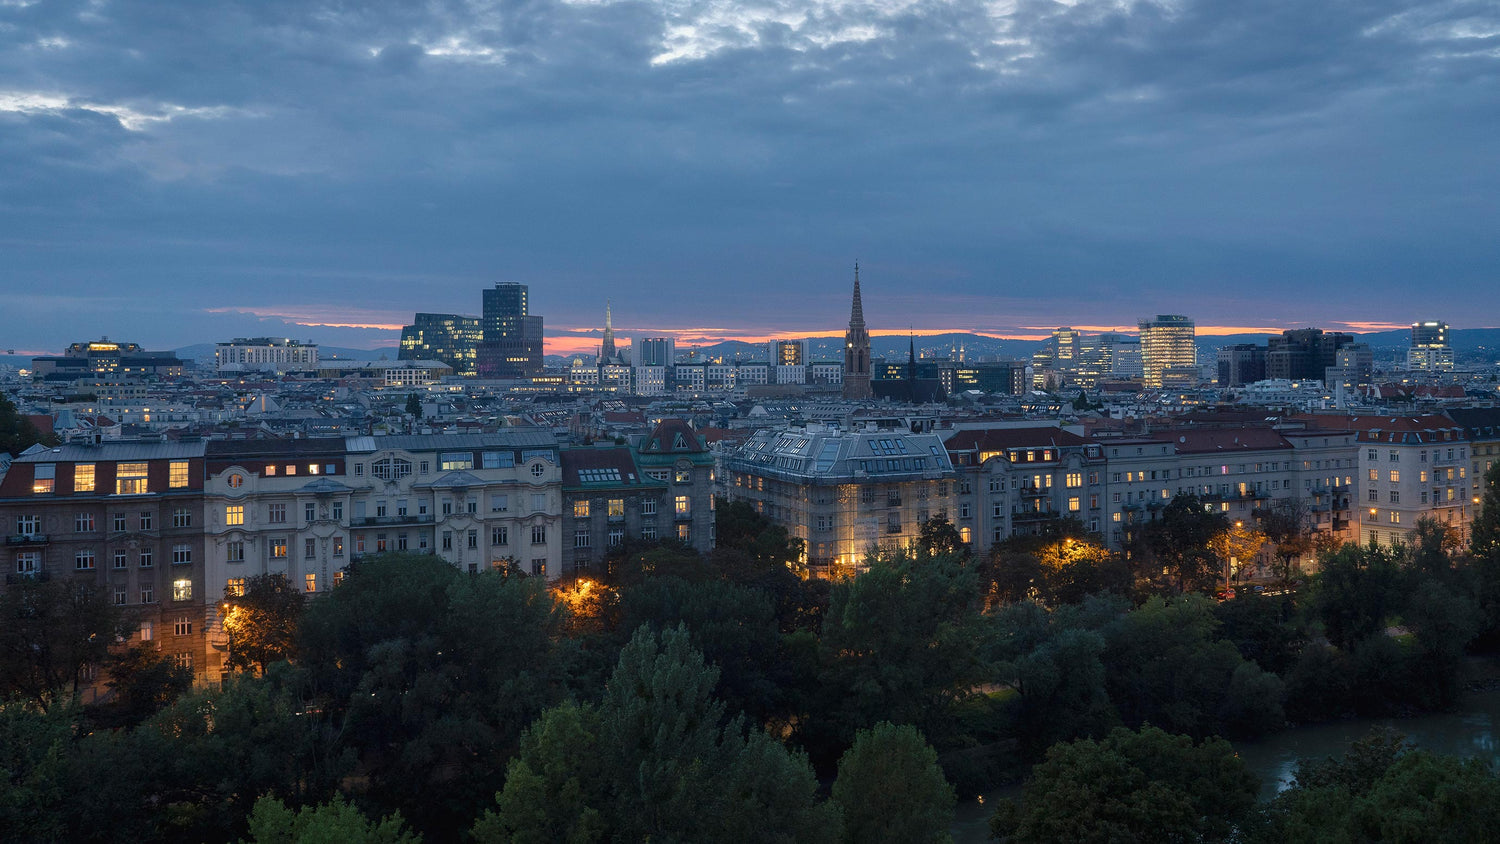 The city of Vienna during sunset in Autumn